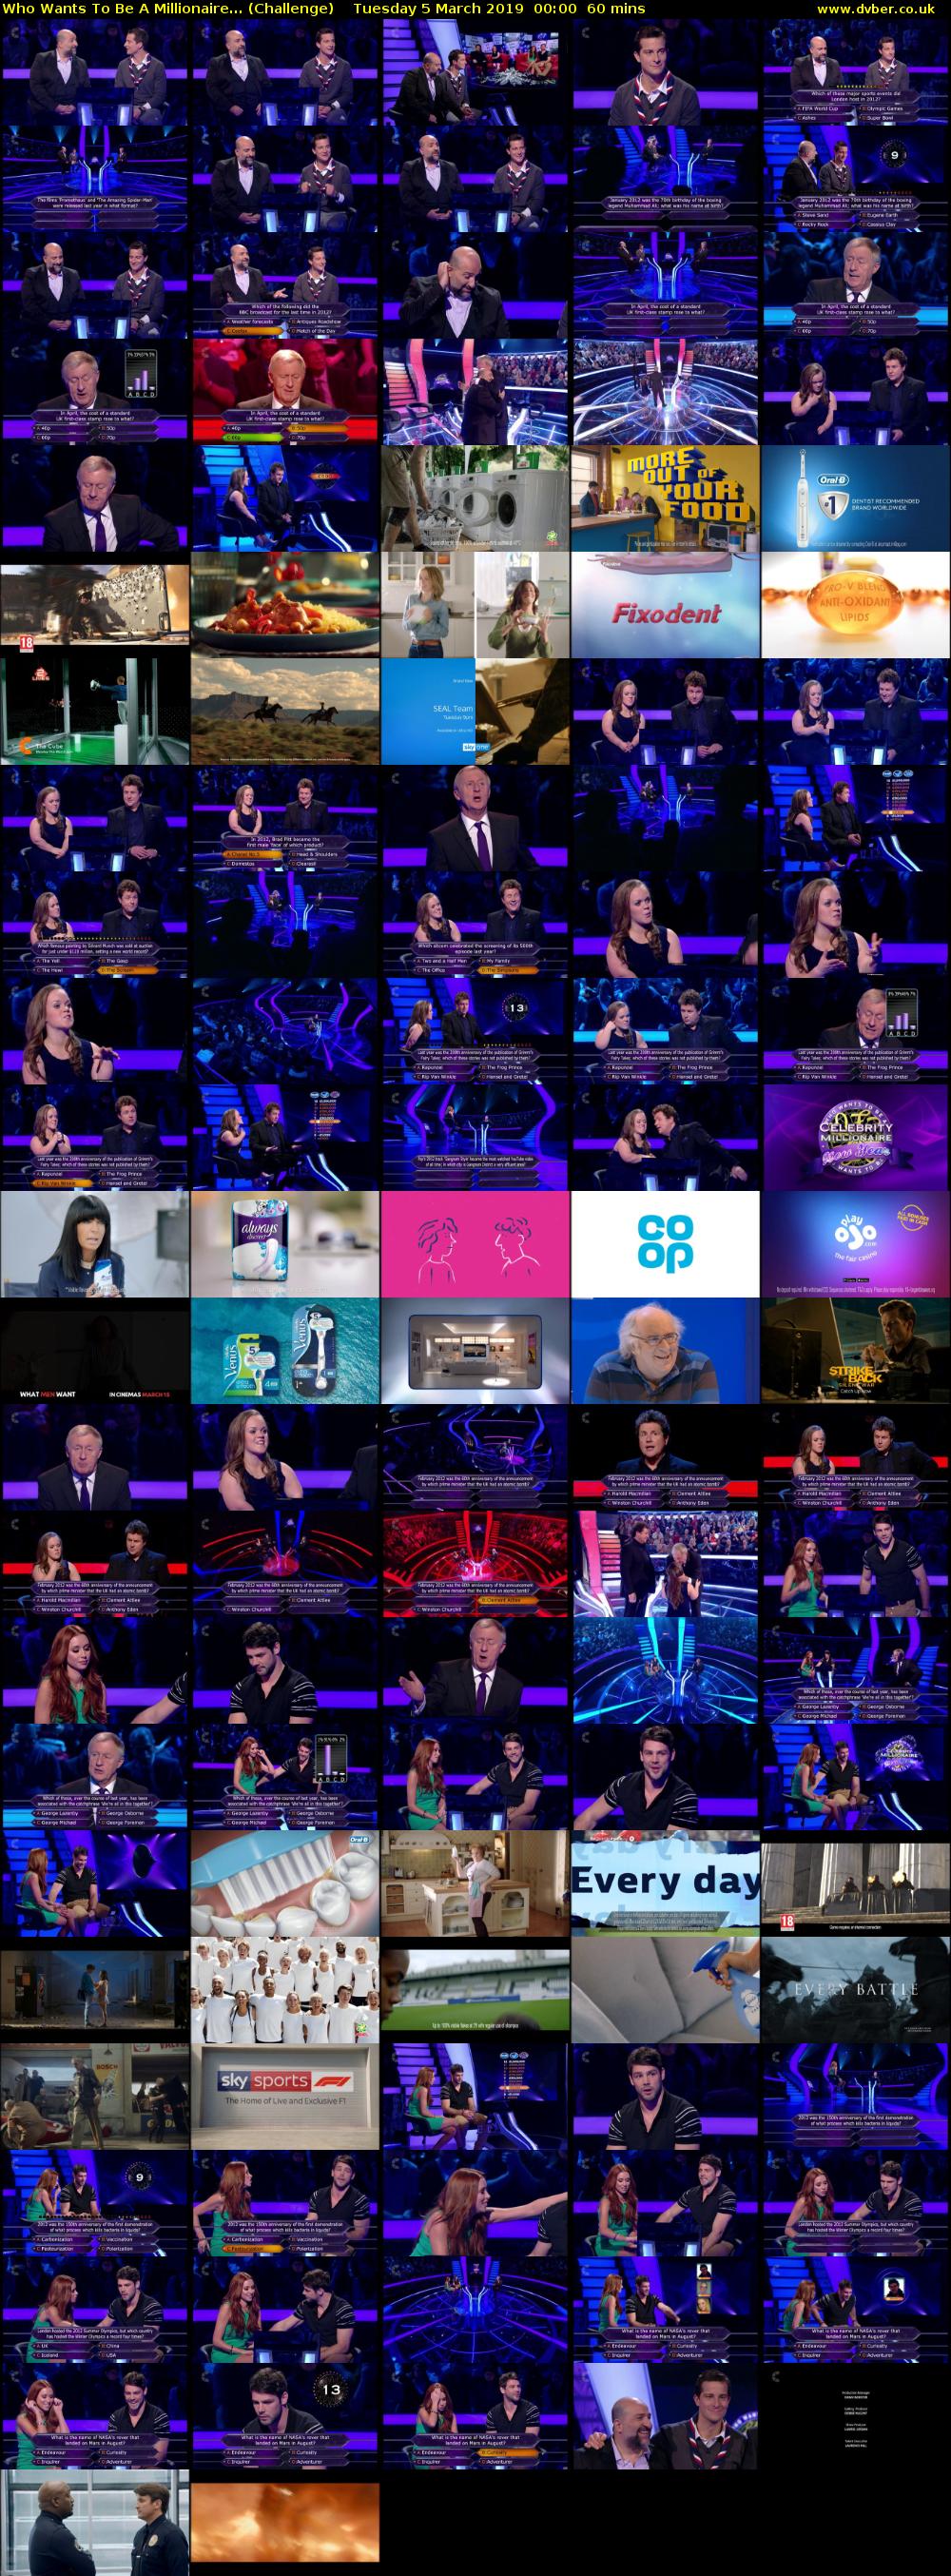 Who Wants To Be A Millionaire... (Challenge) Tuesday 5 March 2019 00:00 - 01:00